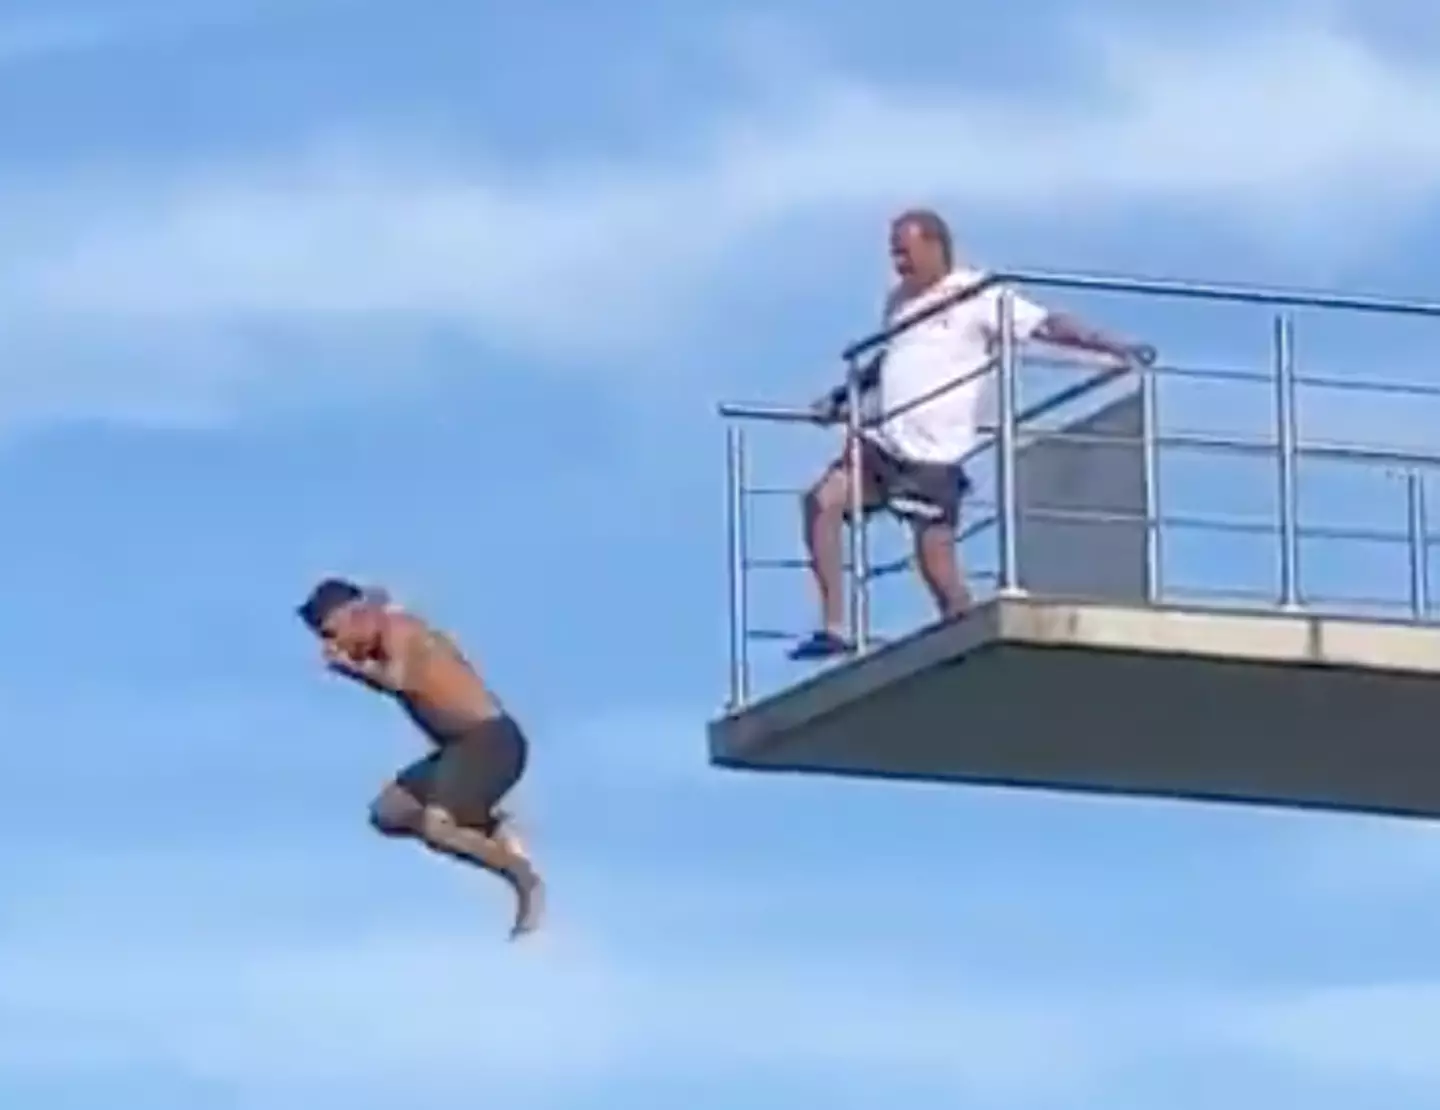 The lifeguard didn't stop until the man was off the ledge.